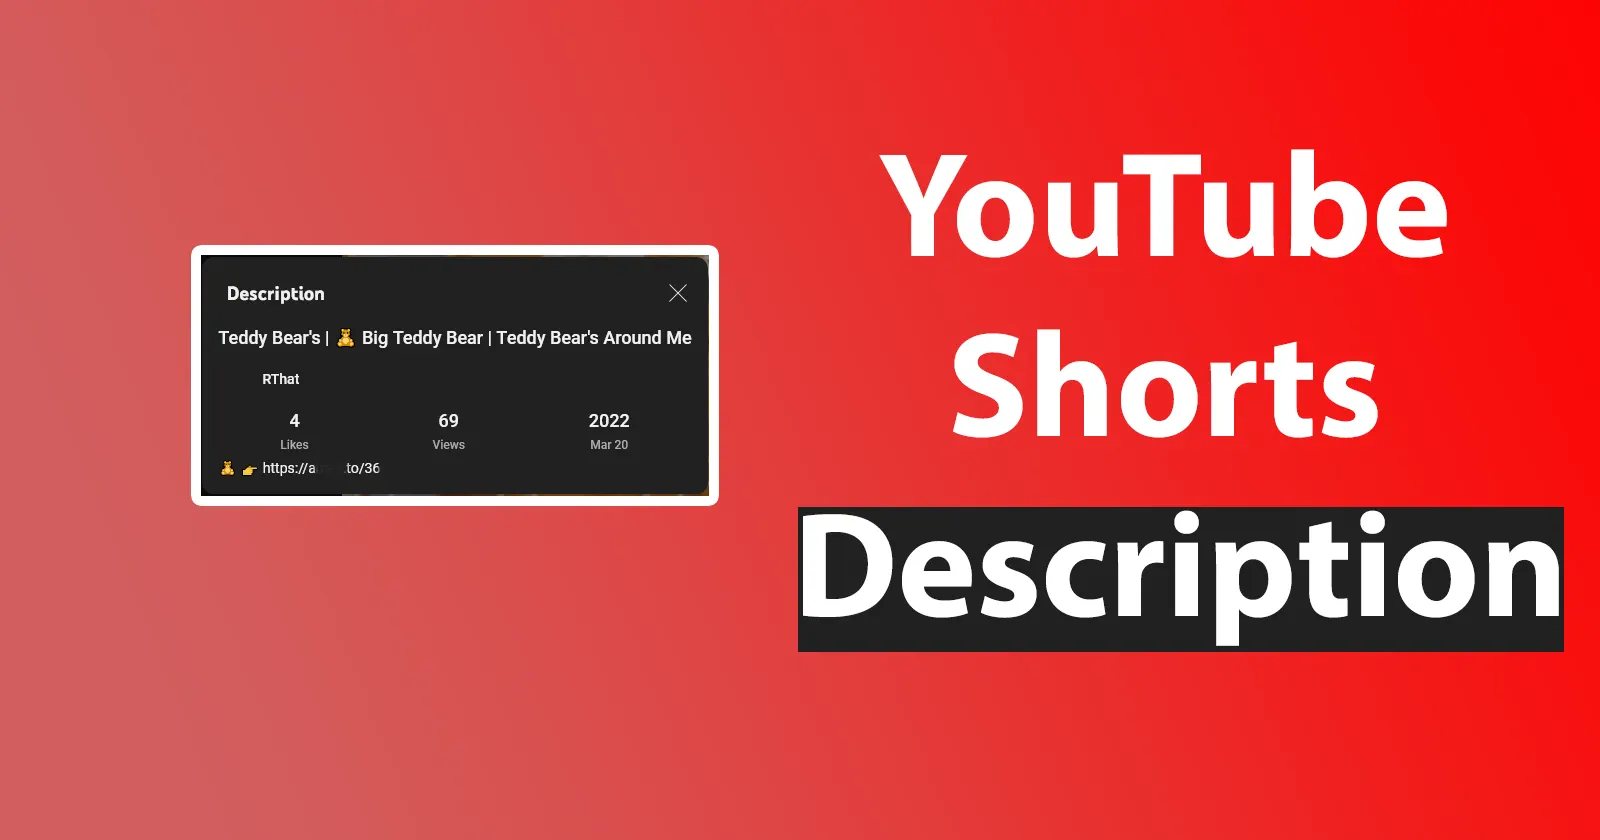 How to See Description in YouTube Shorts » Reveal That